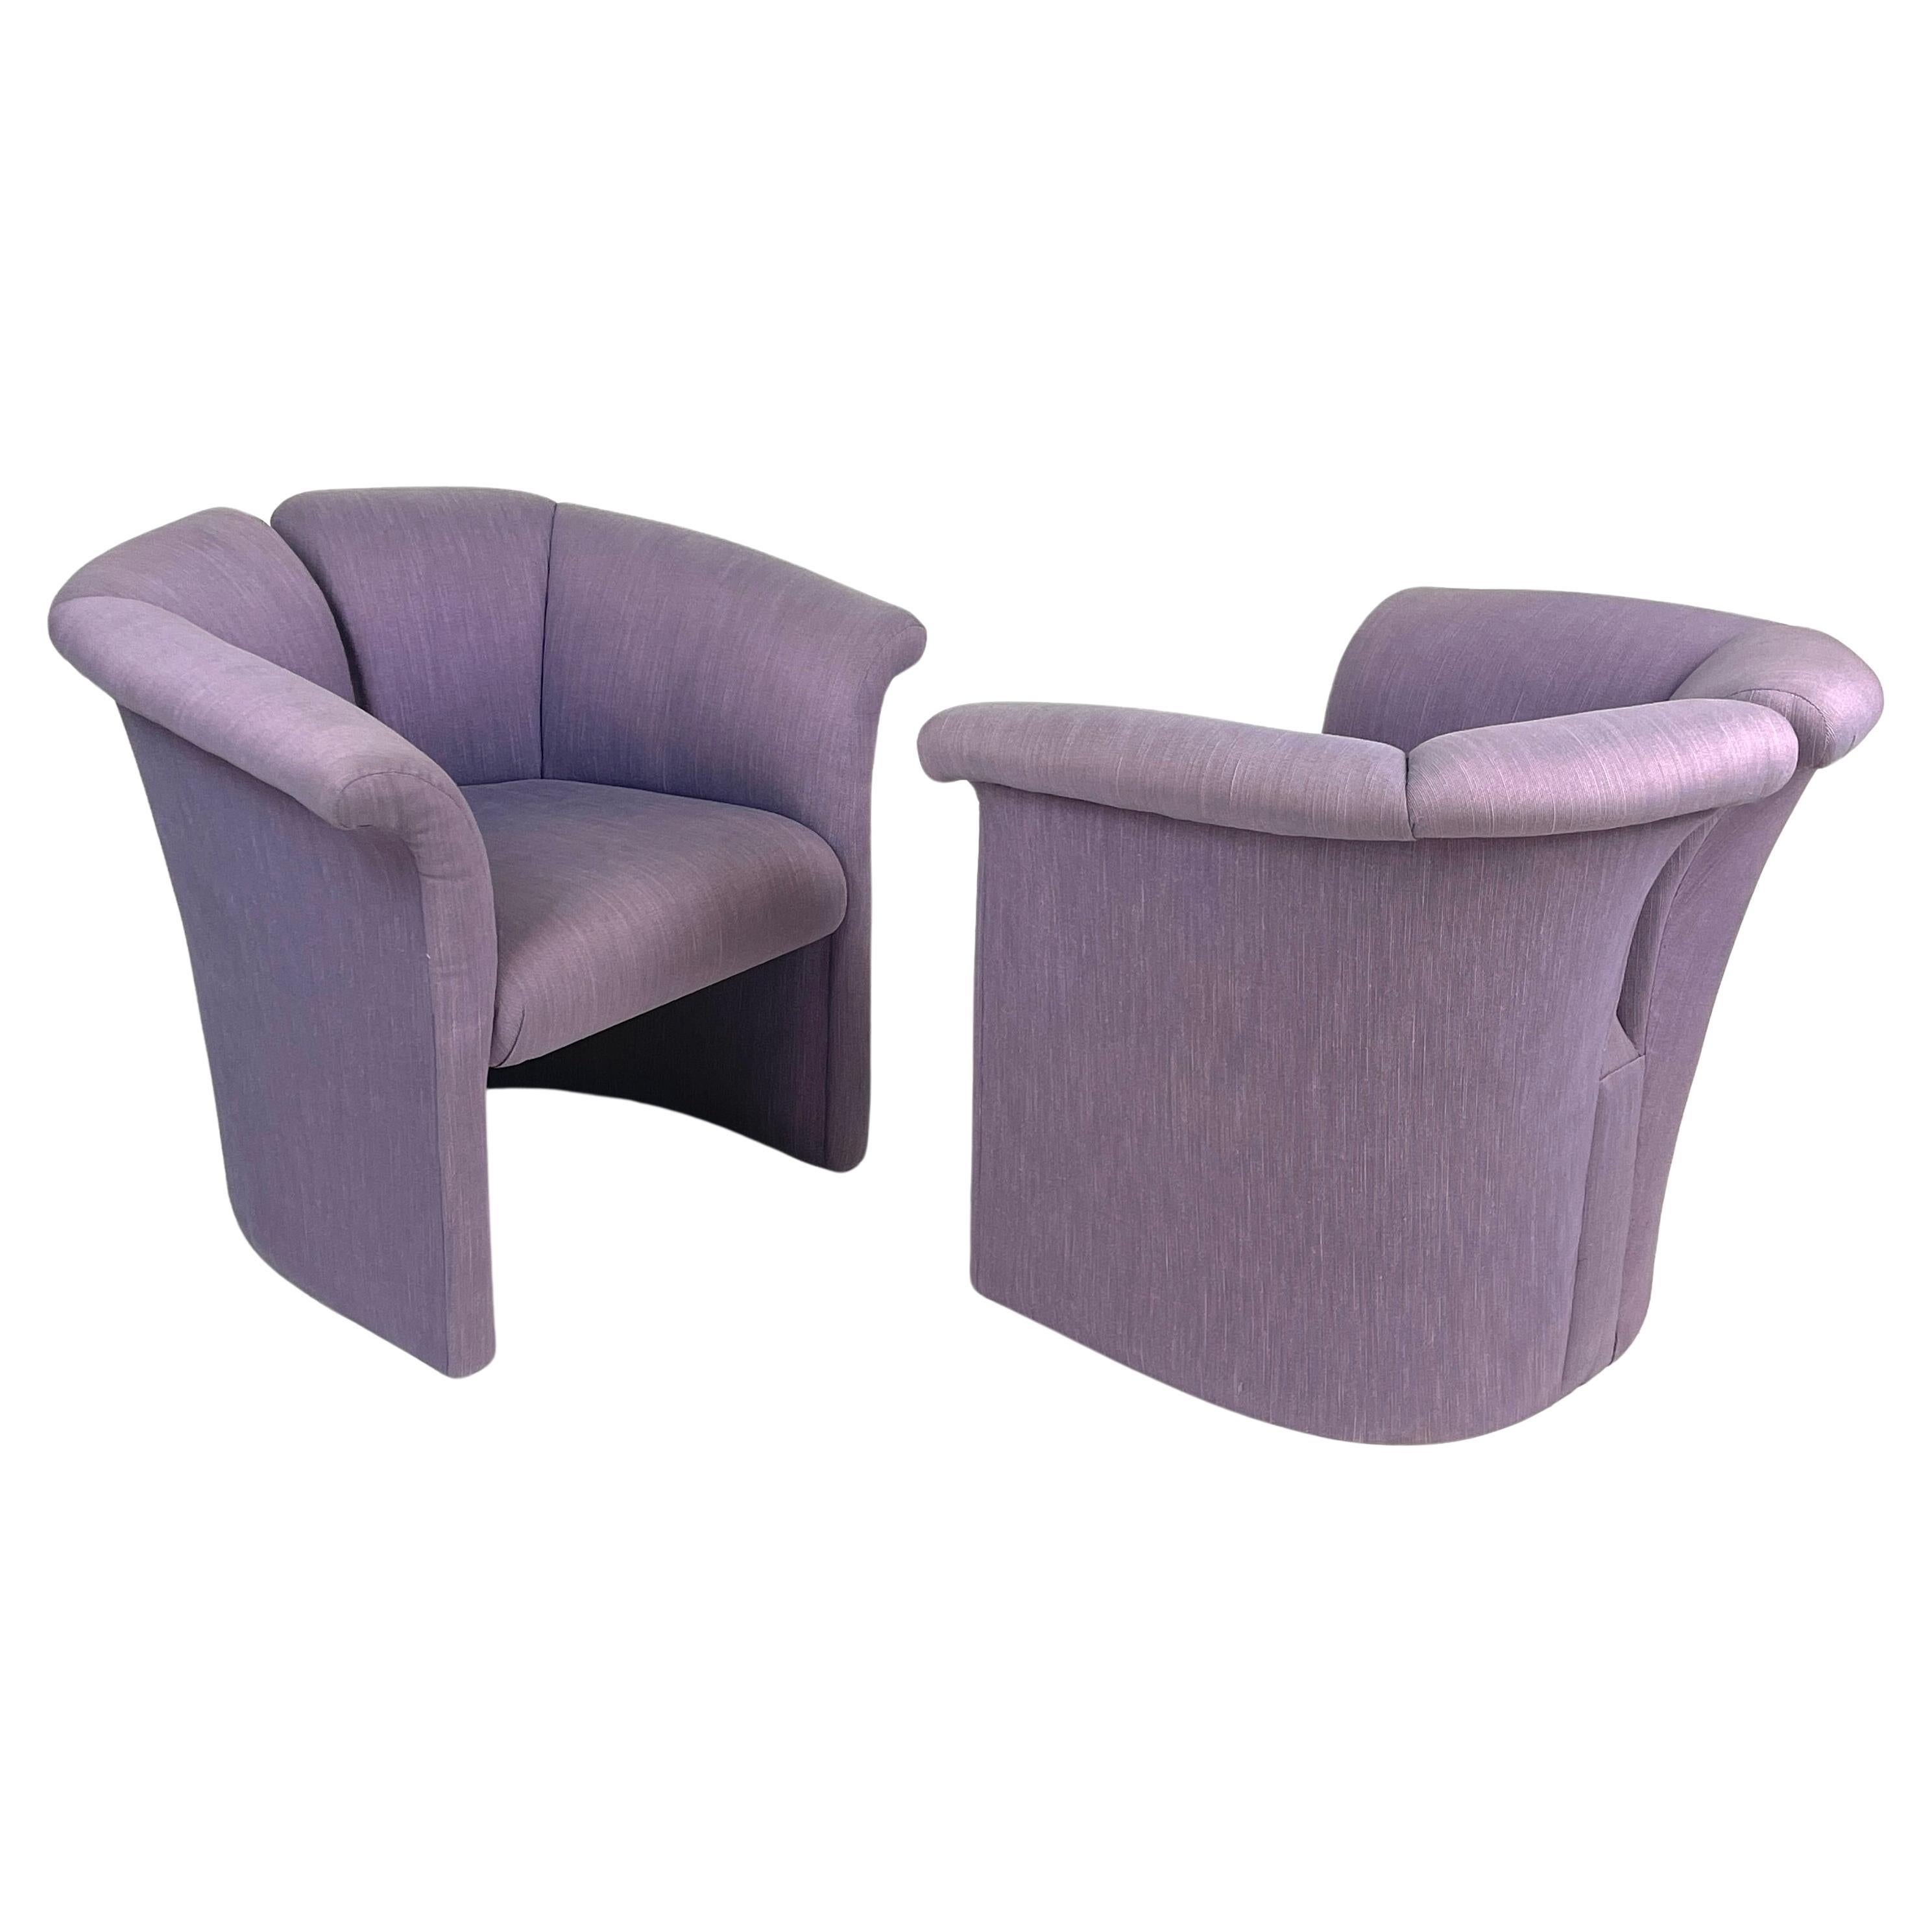 Stunning Pair of Split Back Postmodern Barrel Chairs in Excellent Upholstery